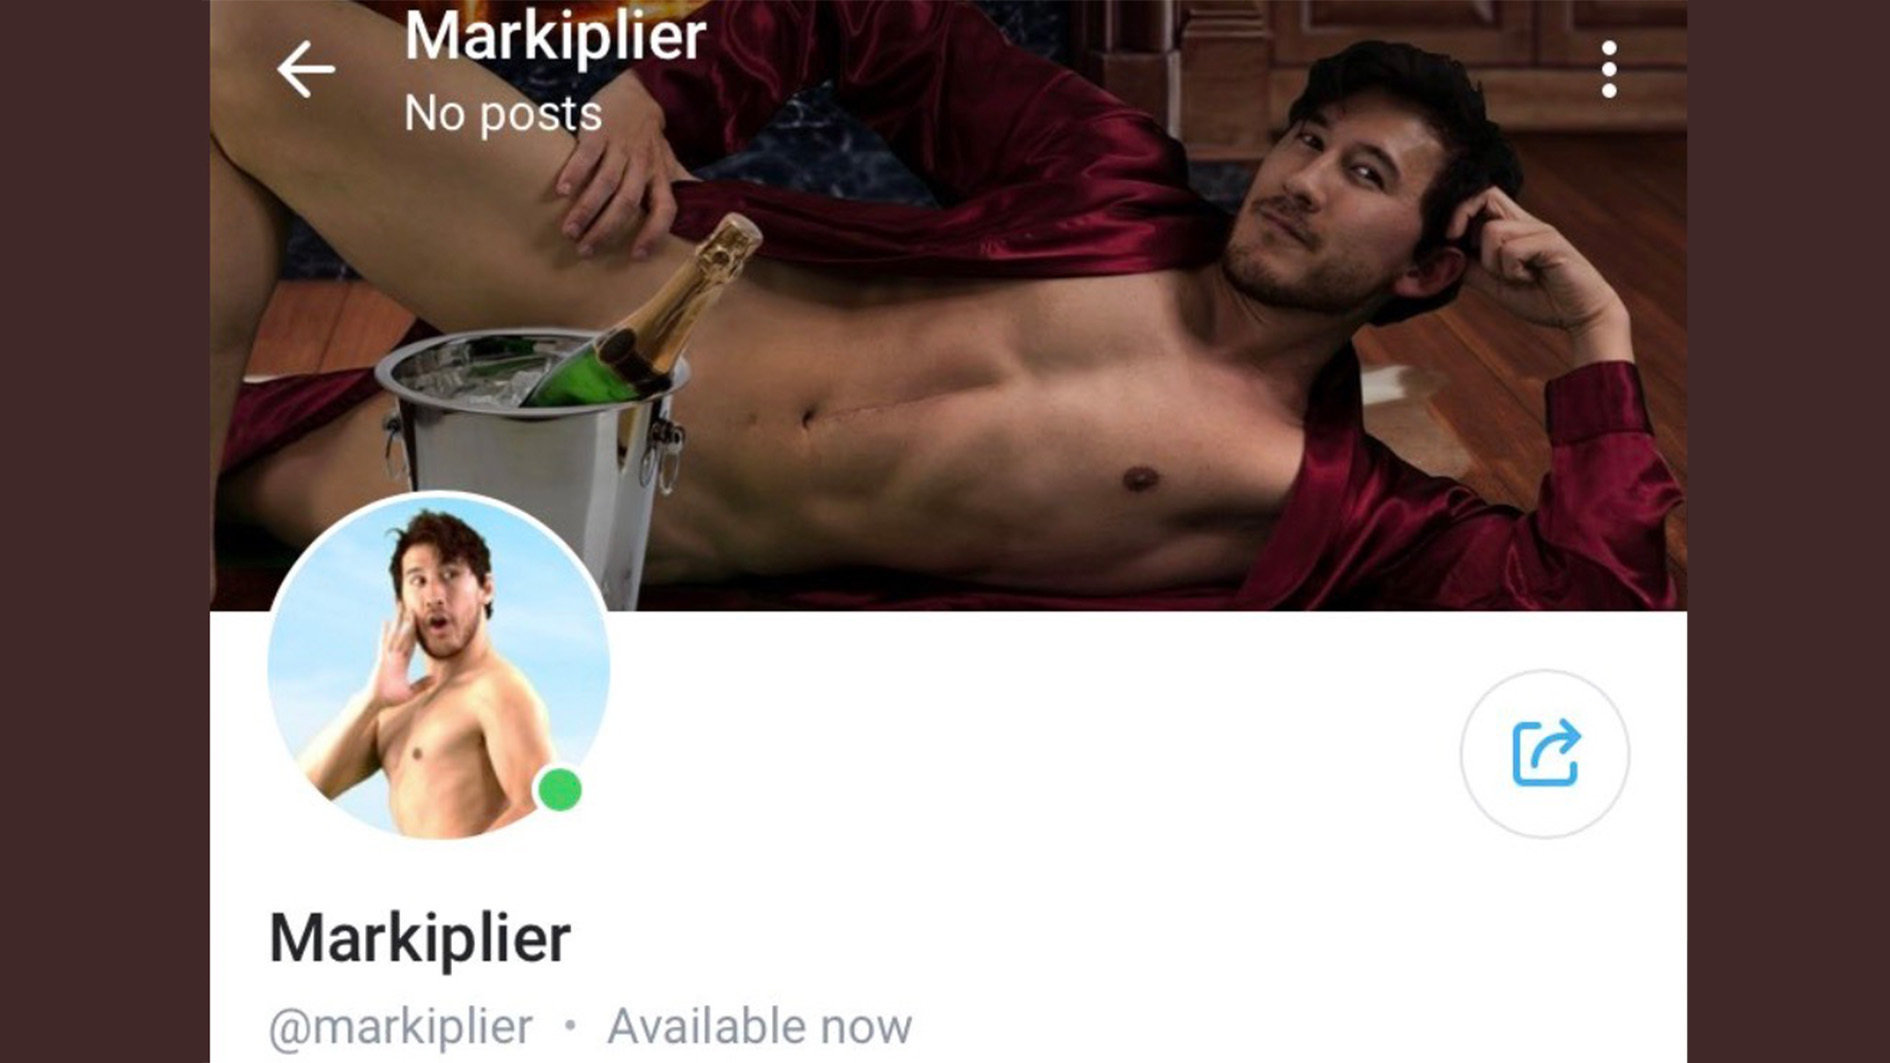 HD What Does Markiplier Do On Onlyfans